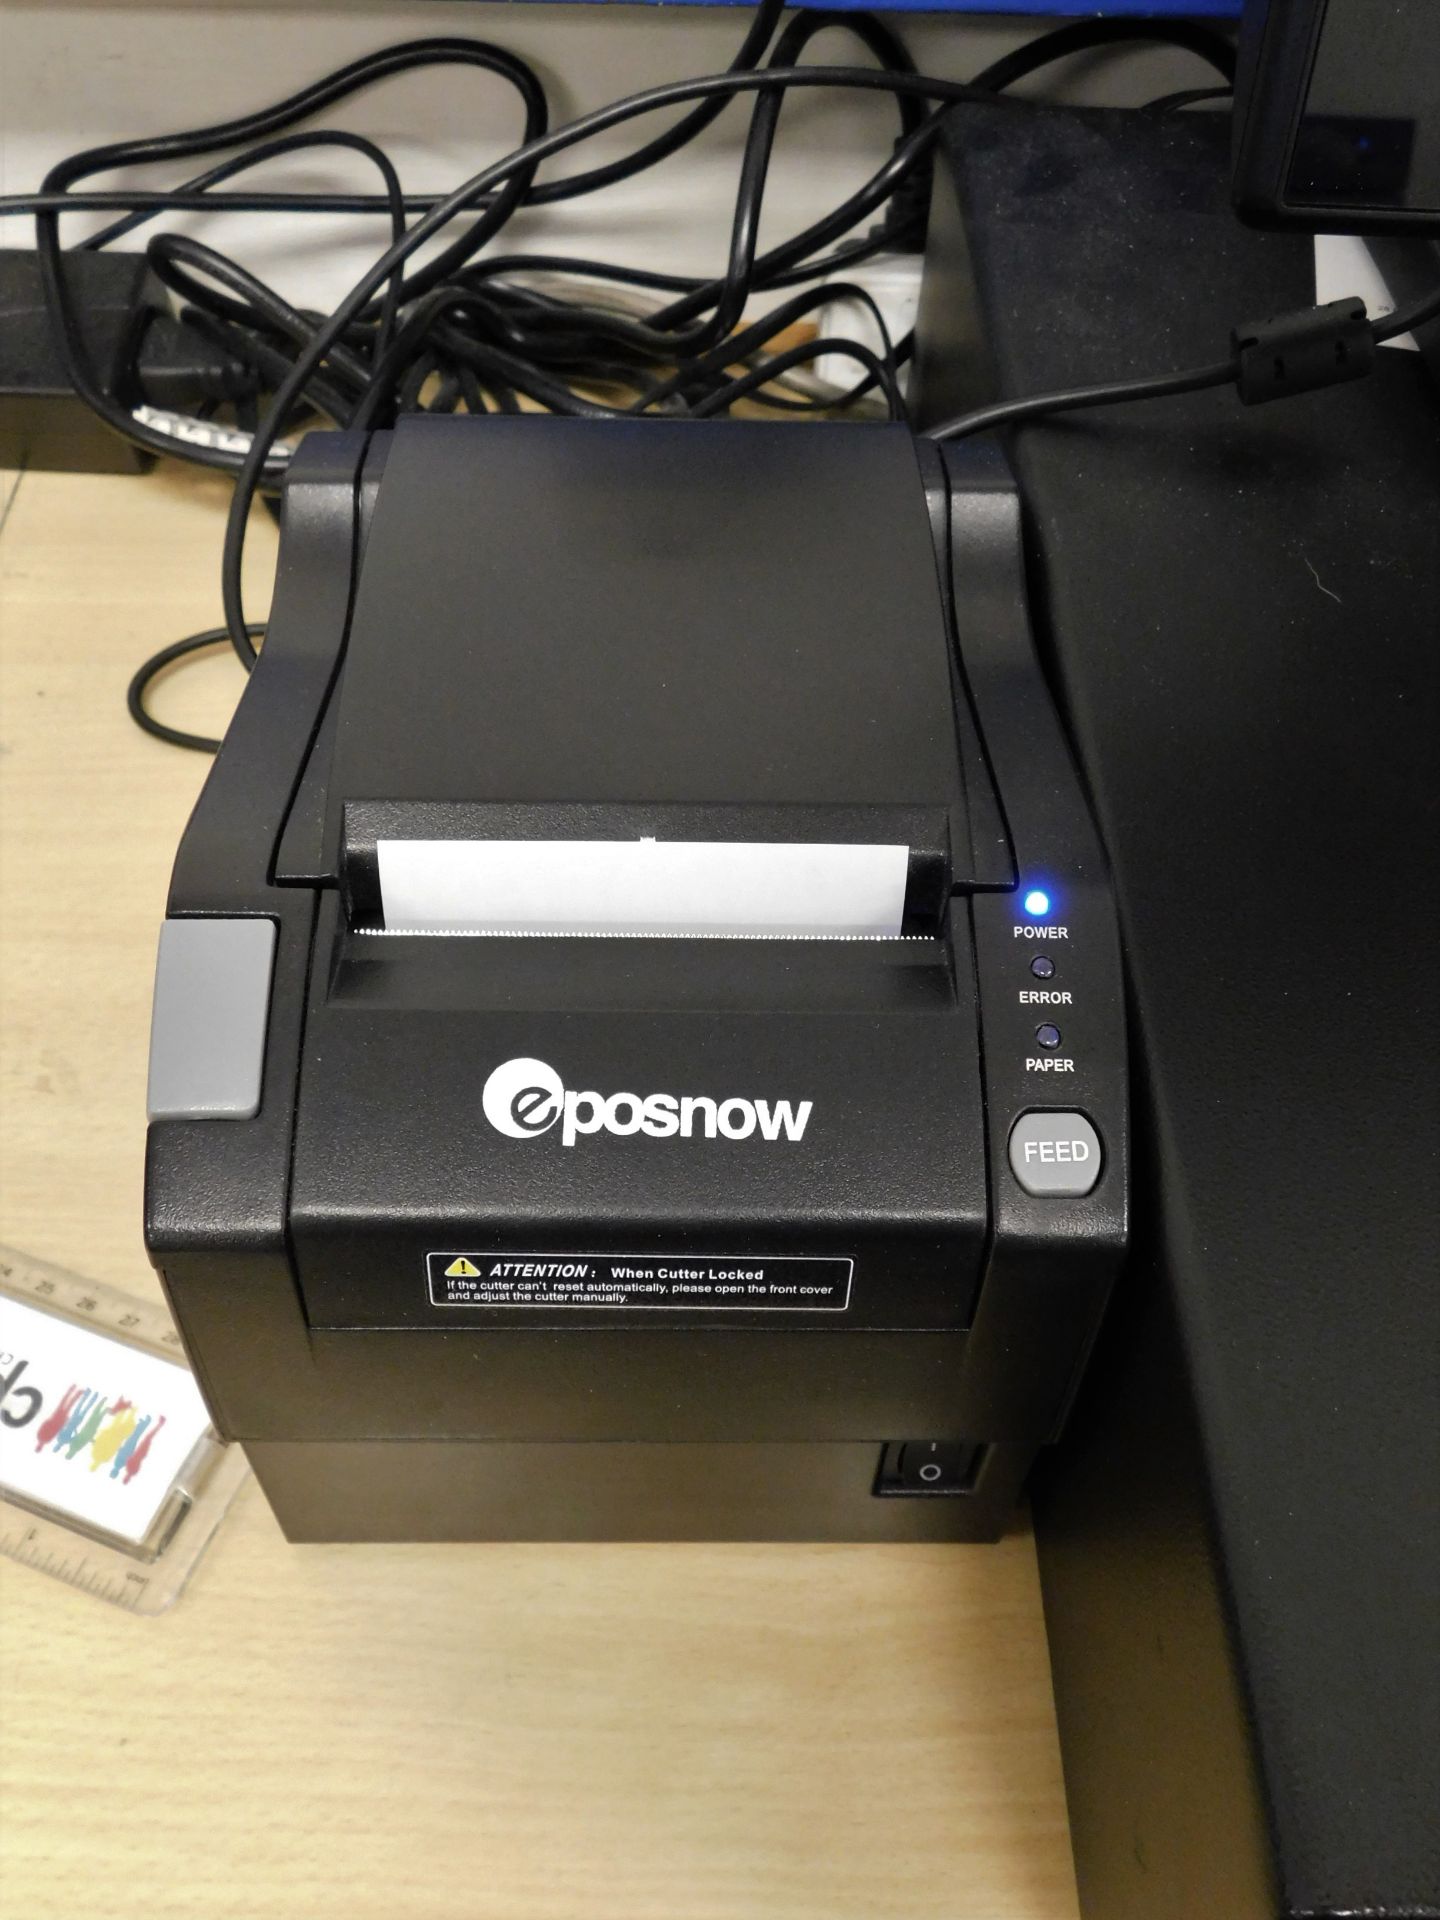 Eposnow DC24V/1A Cash Drawer & Monitor with POS80GXa Receipt Printer (Location: Finchley. Please - Image 2 of 3